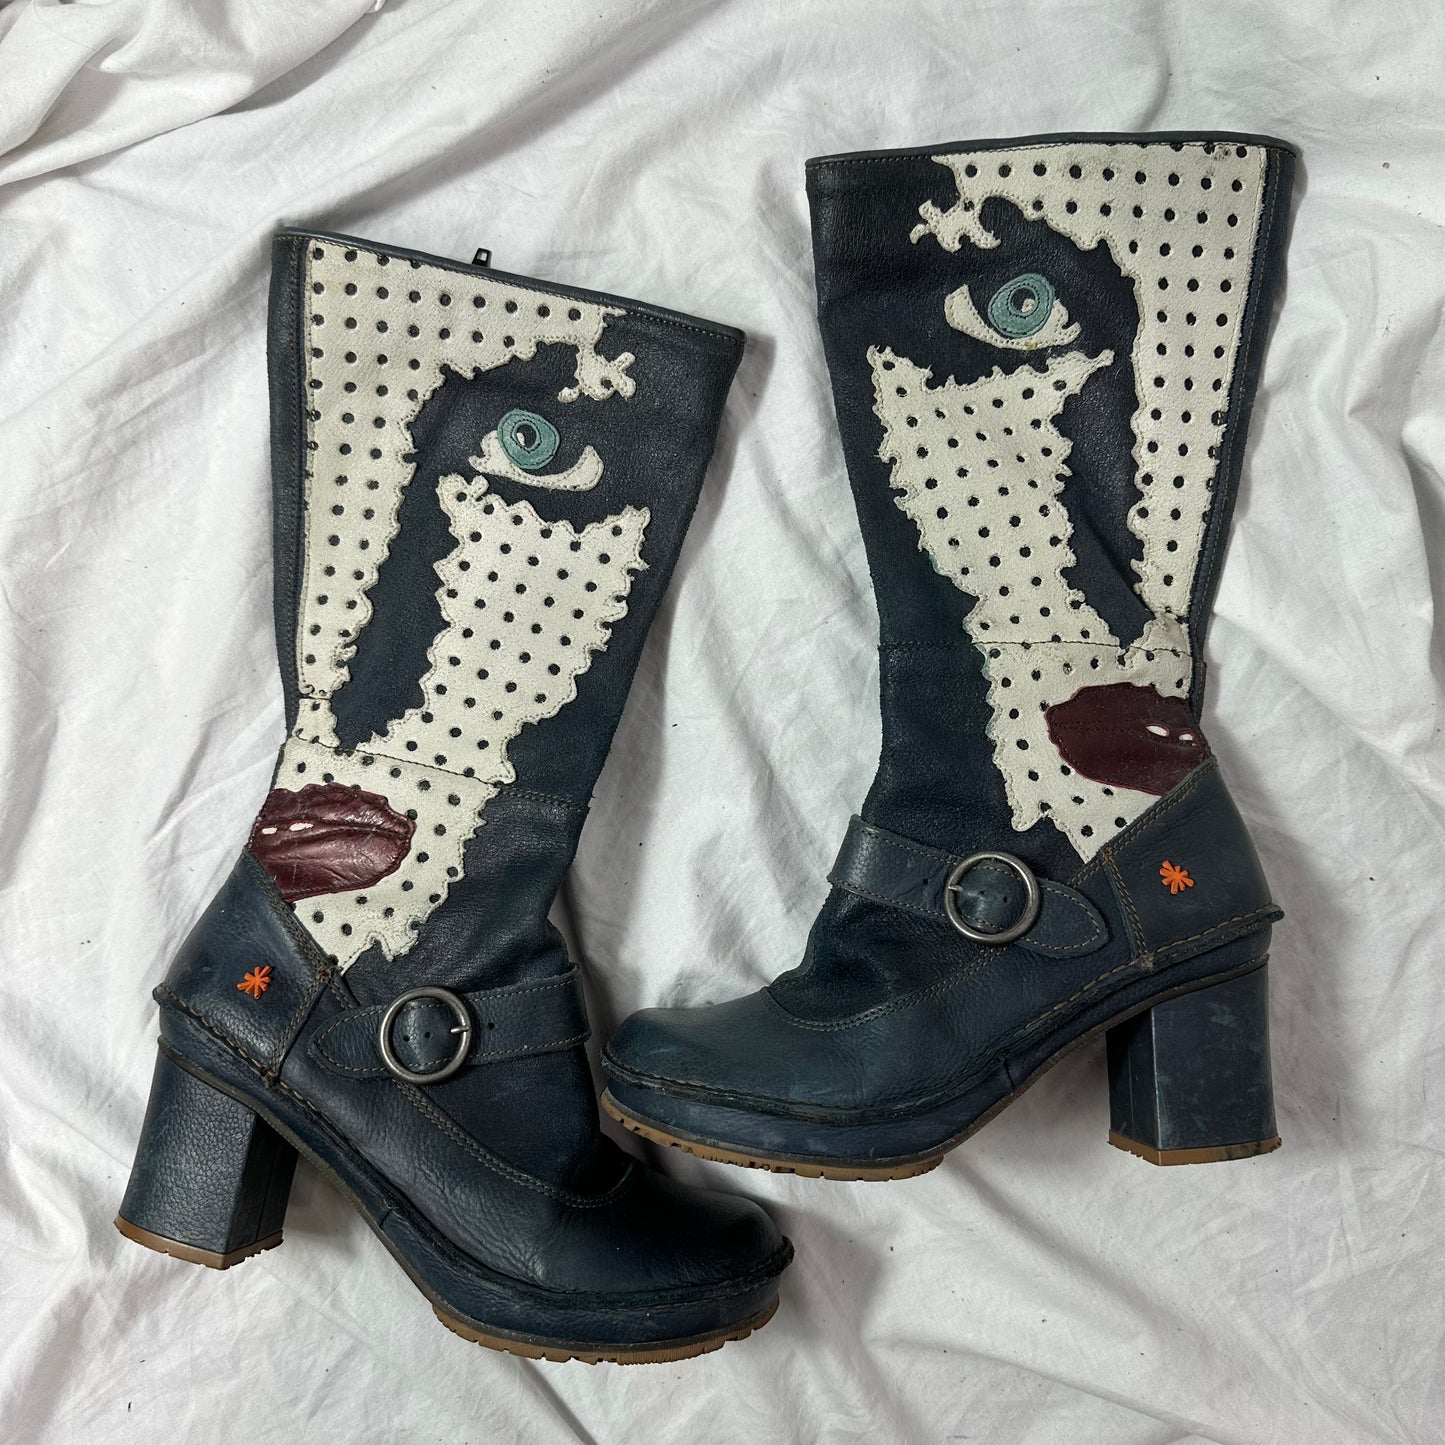 The Art Company Vintage Face Heel Boots 39/39.5